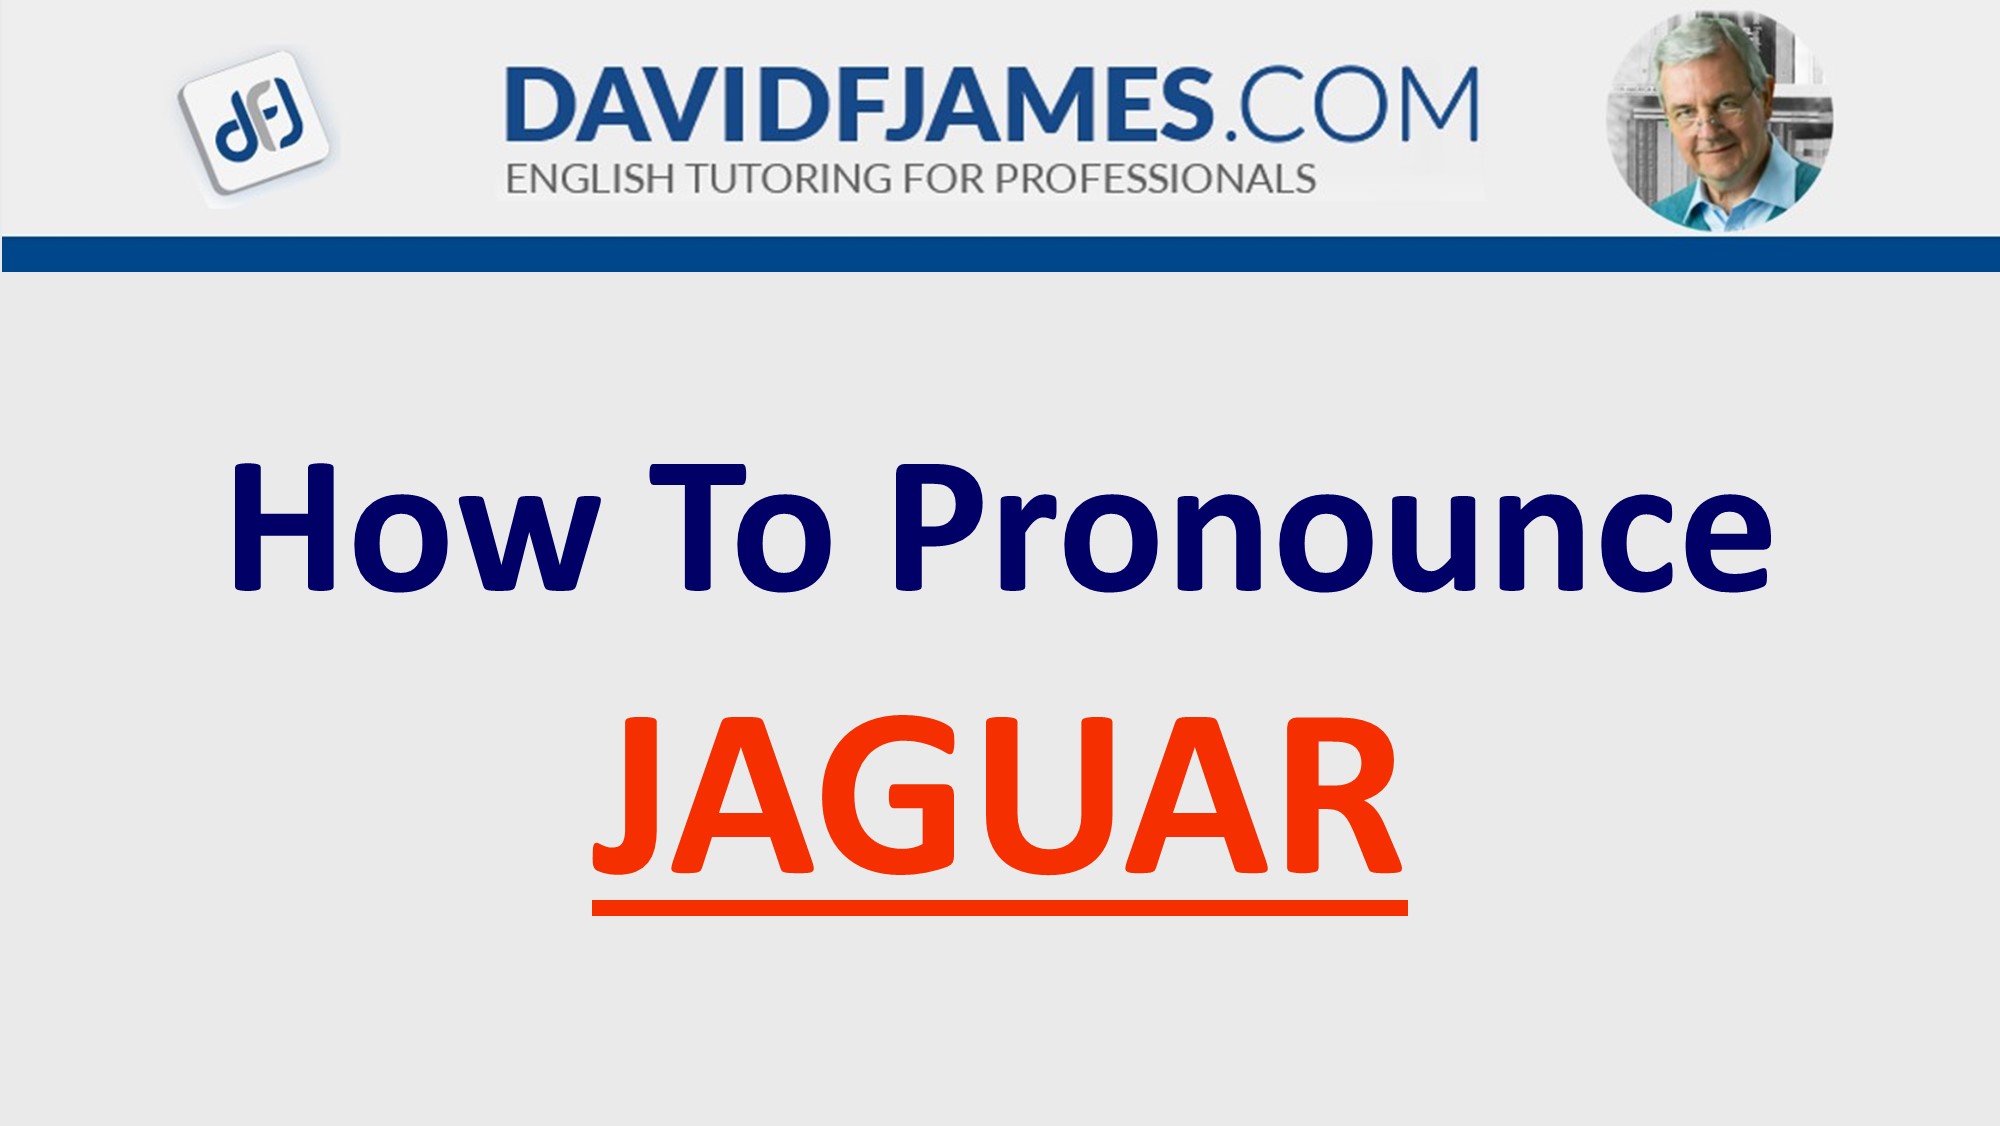 learn how to pronounce jaguar correctly